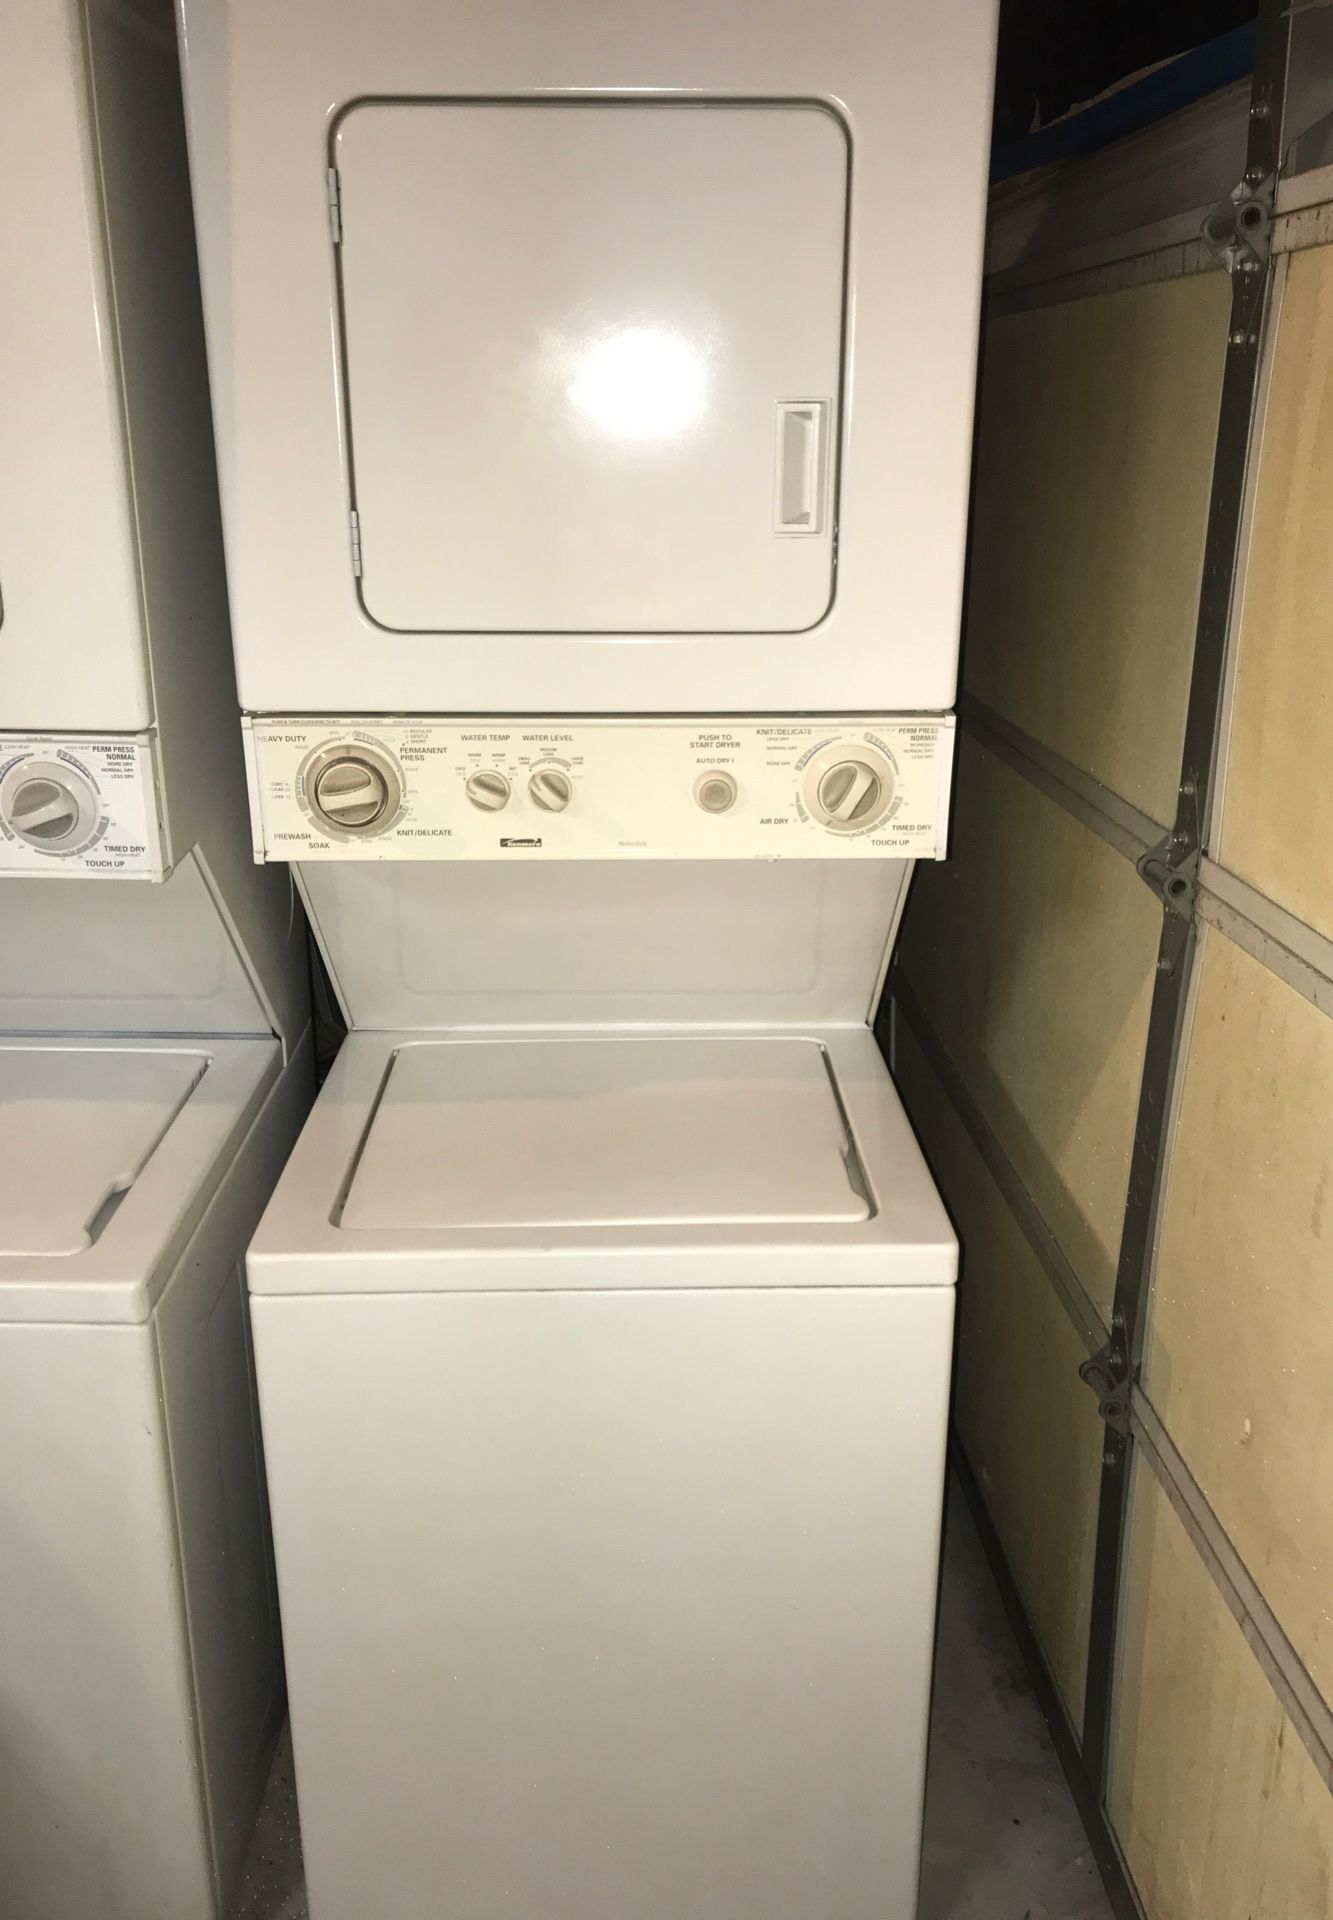 Kenmore washer and electric dryer 24” wide works perfectly